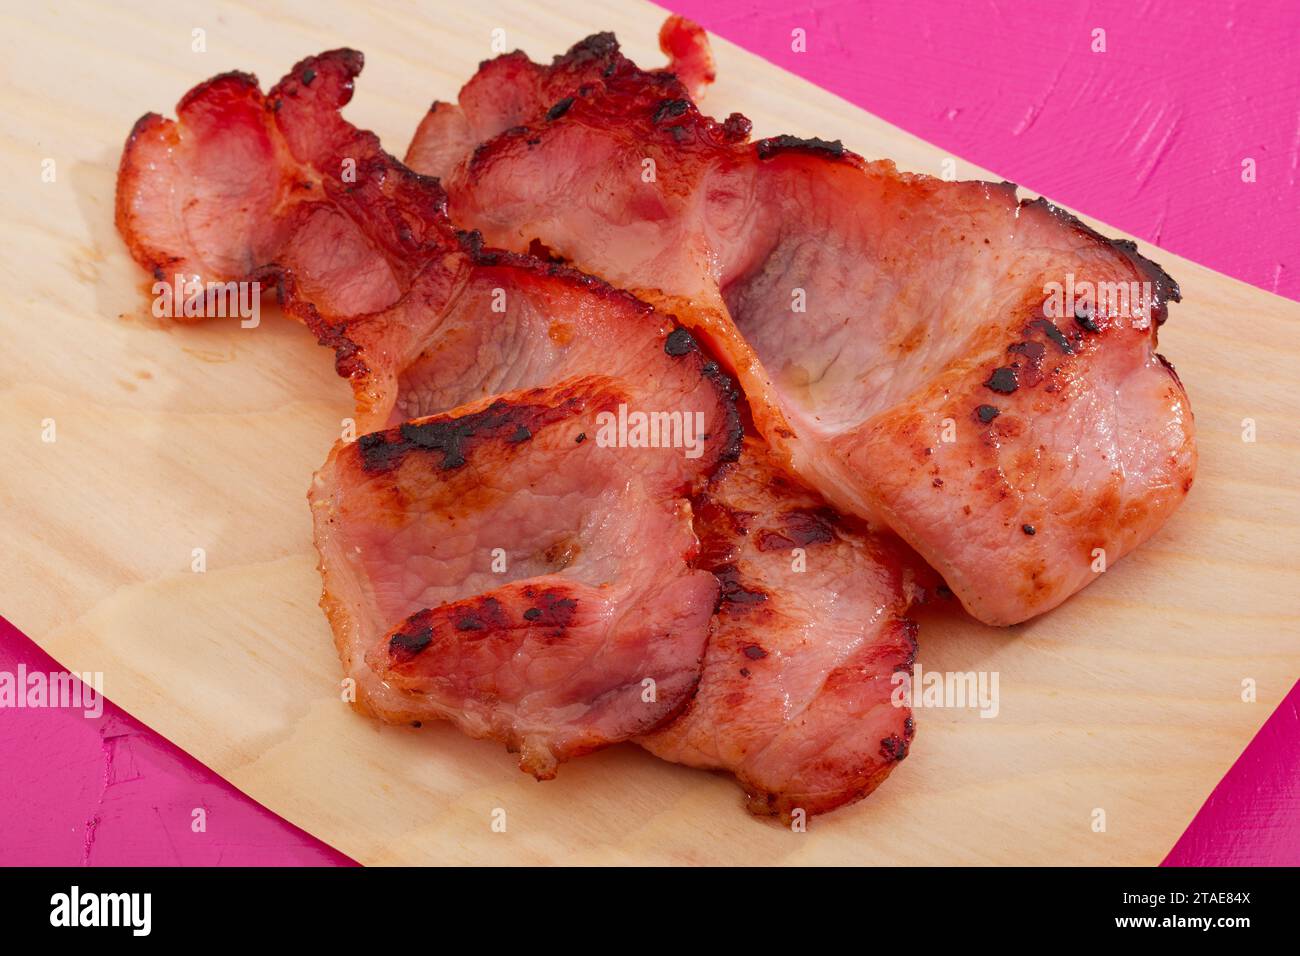 Two rashers of bacon just out of the frying pan. Stock Photo